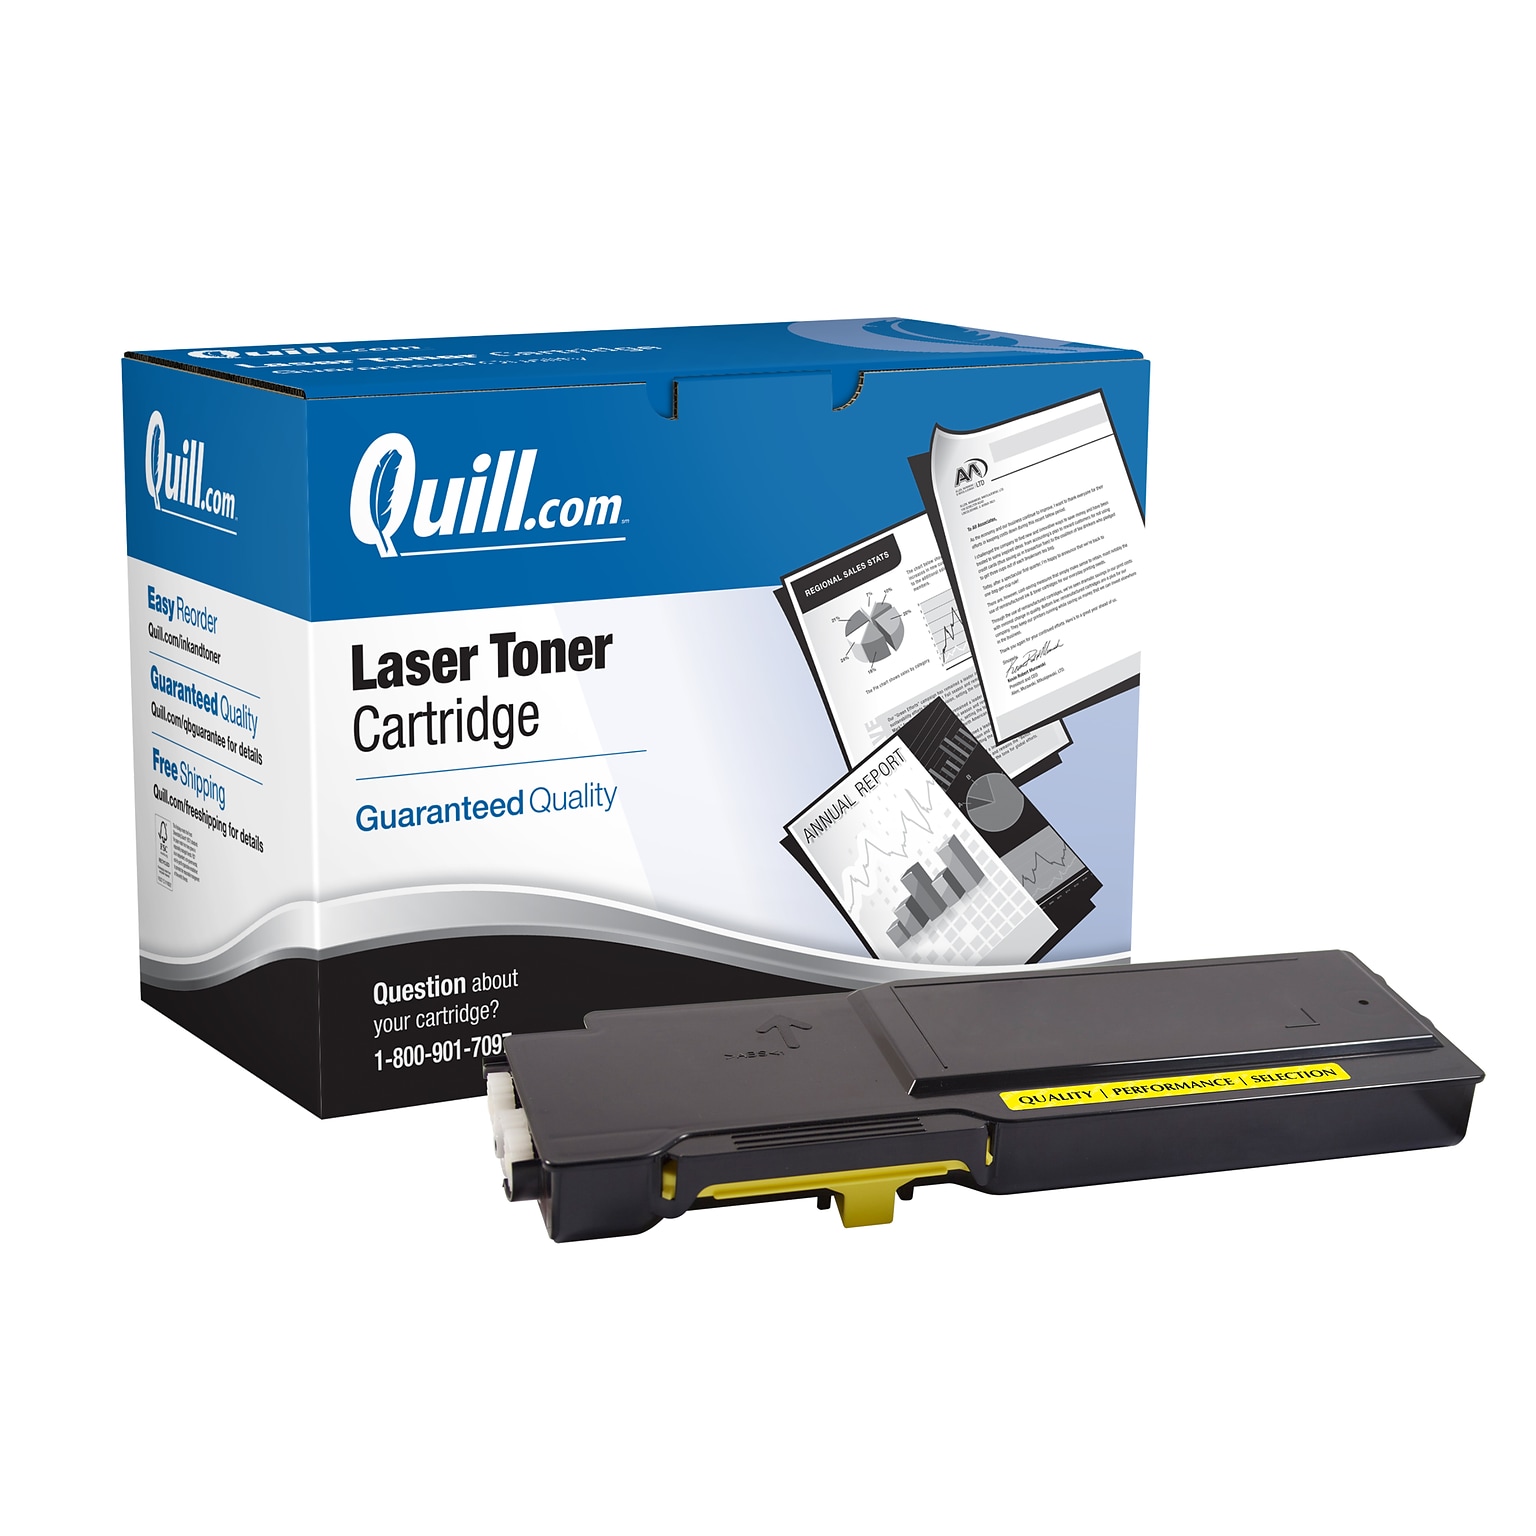 Quill Brand® Remanufactured Yellow High Yield Toner Cartridge Replacement for Xerox 6600/6605 (106R02227) (Lifetime Warranty)